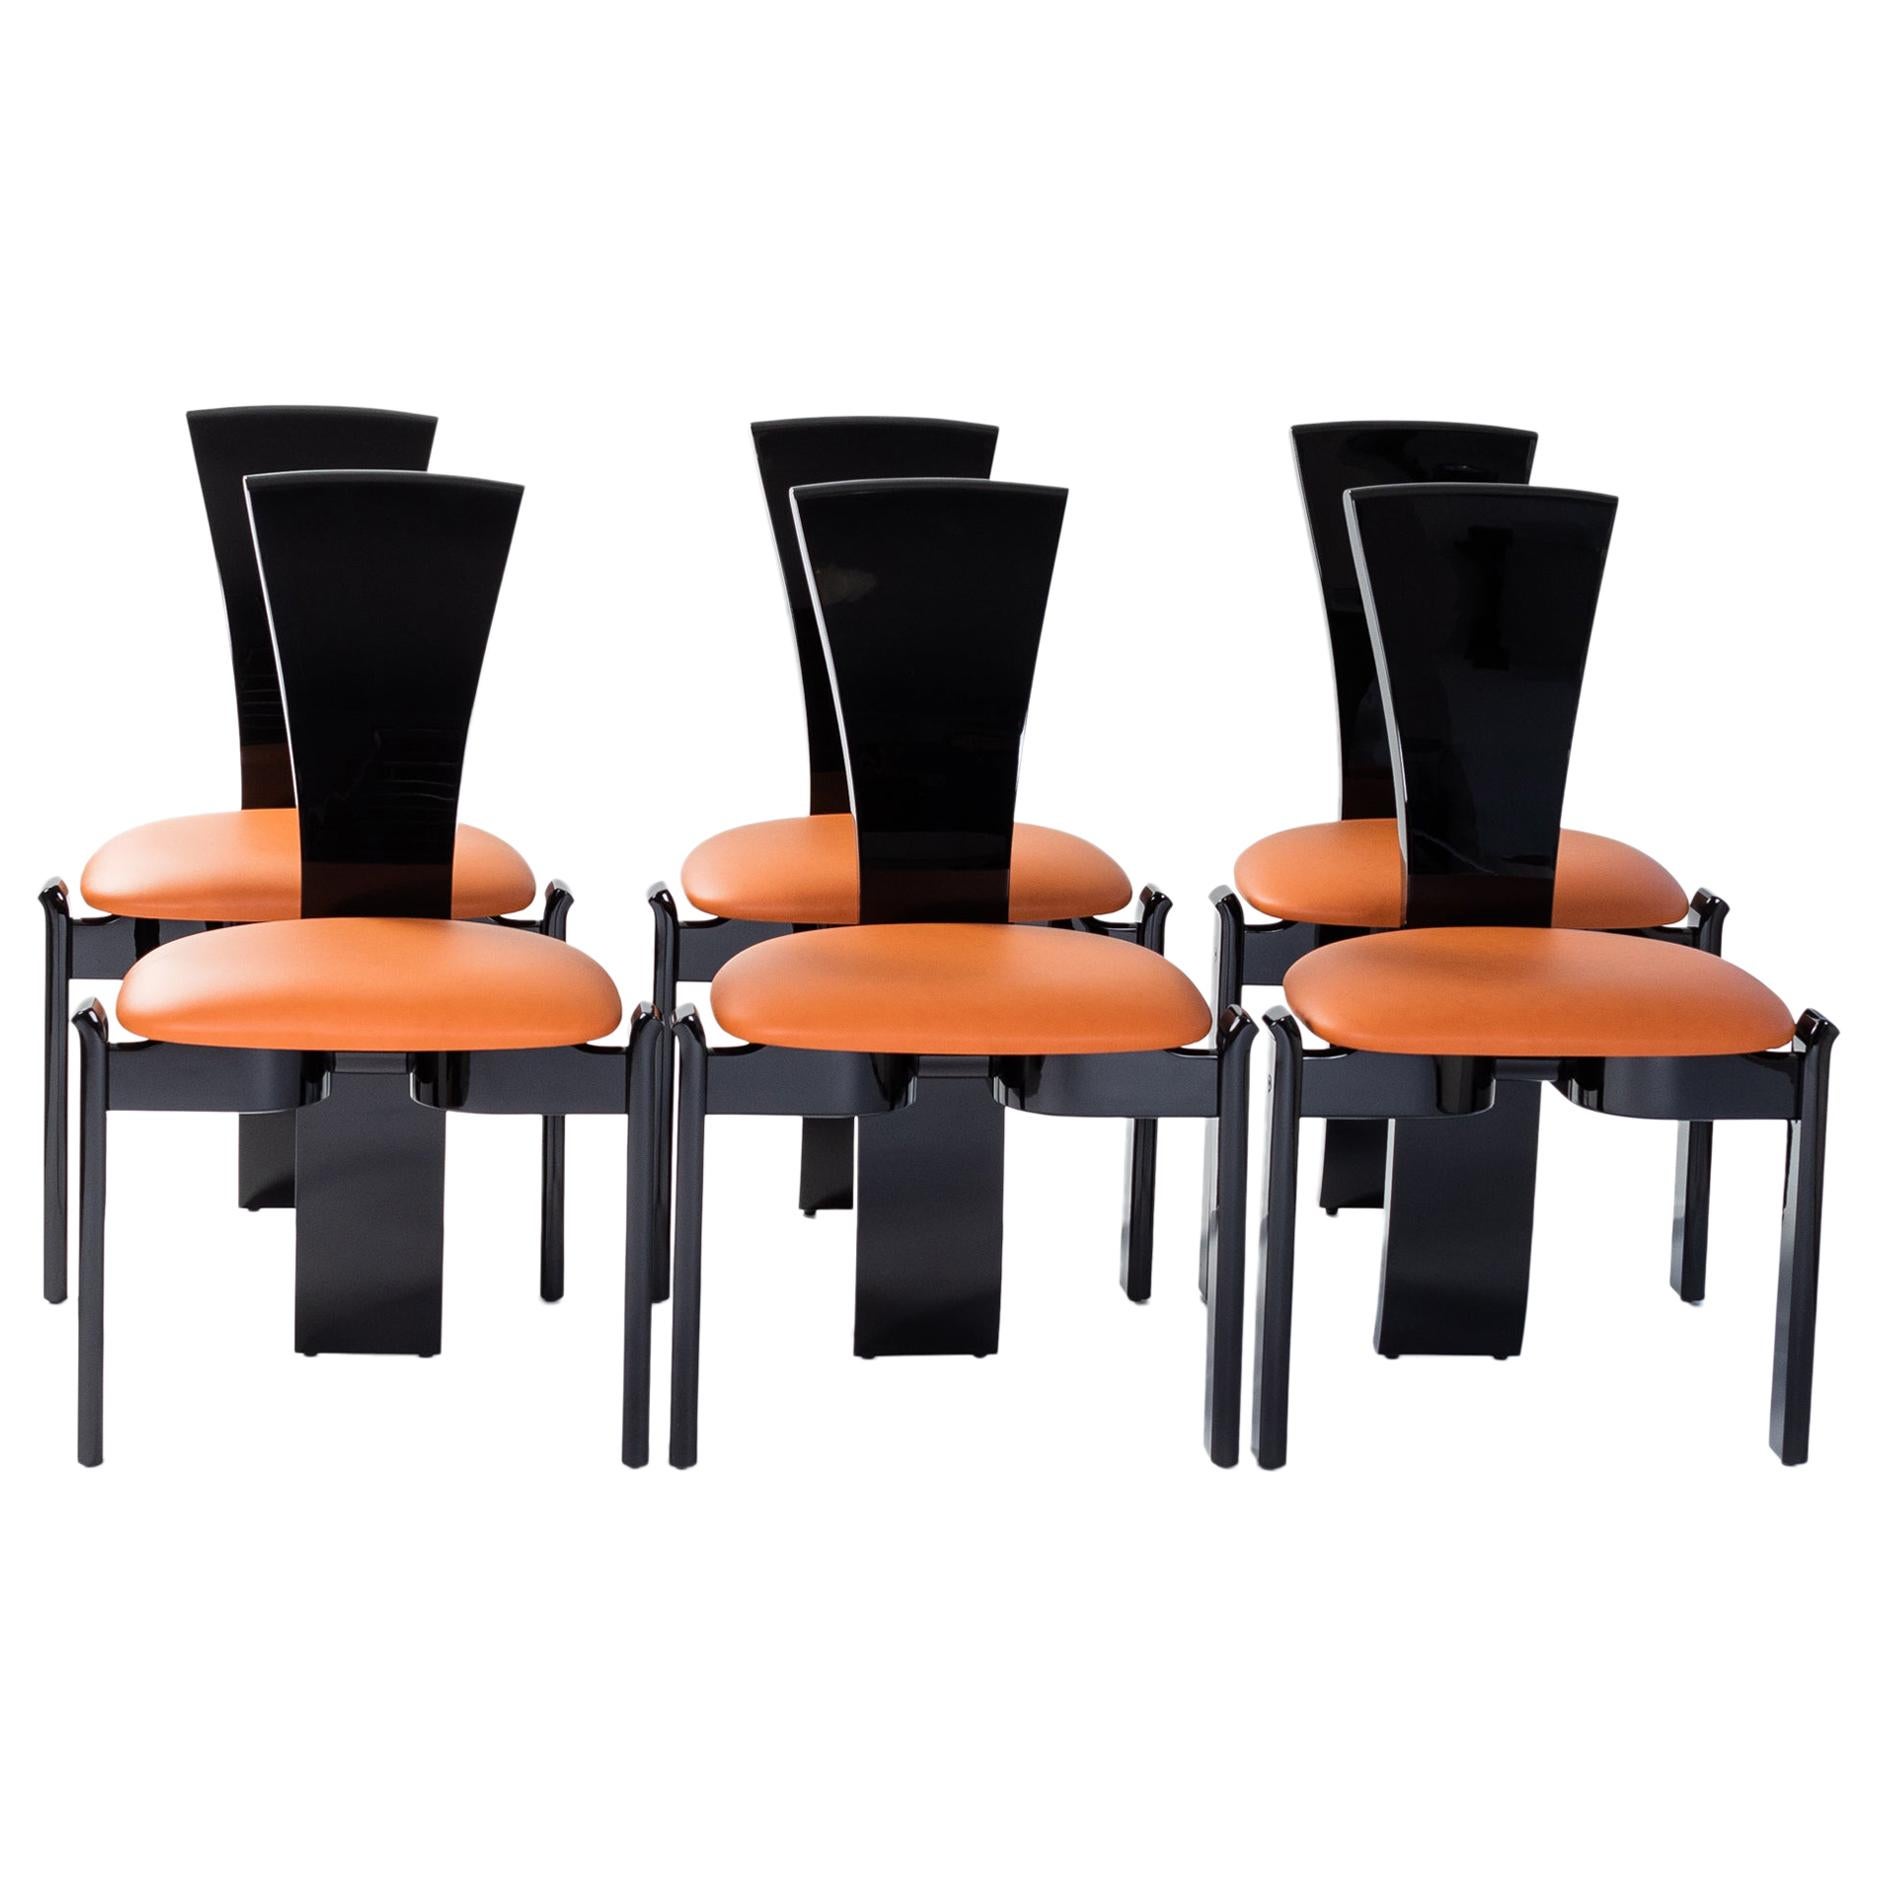 6 French Mid-Century Dining Room Chairs Black Lacquer Hermès Colored Leather For Sale